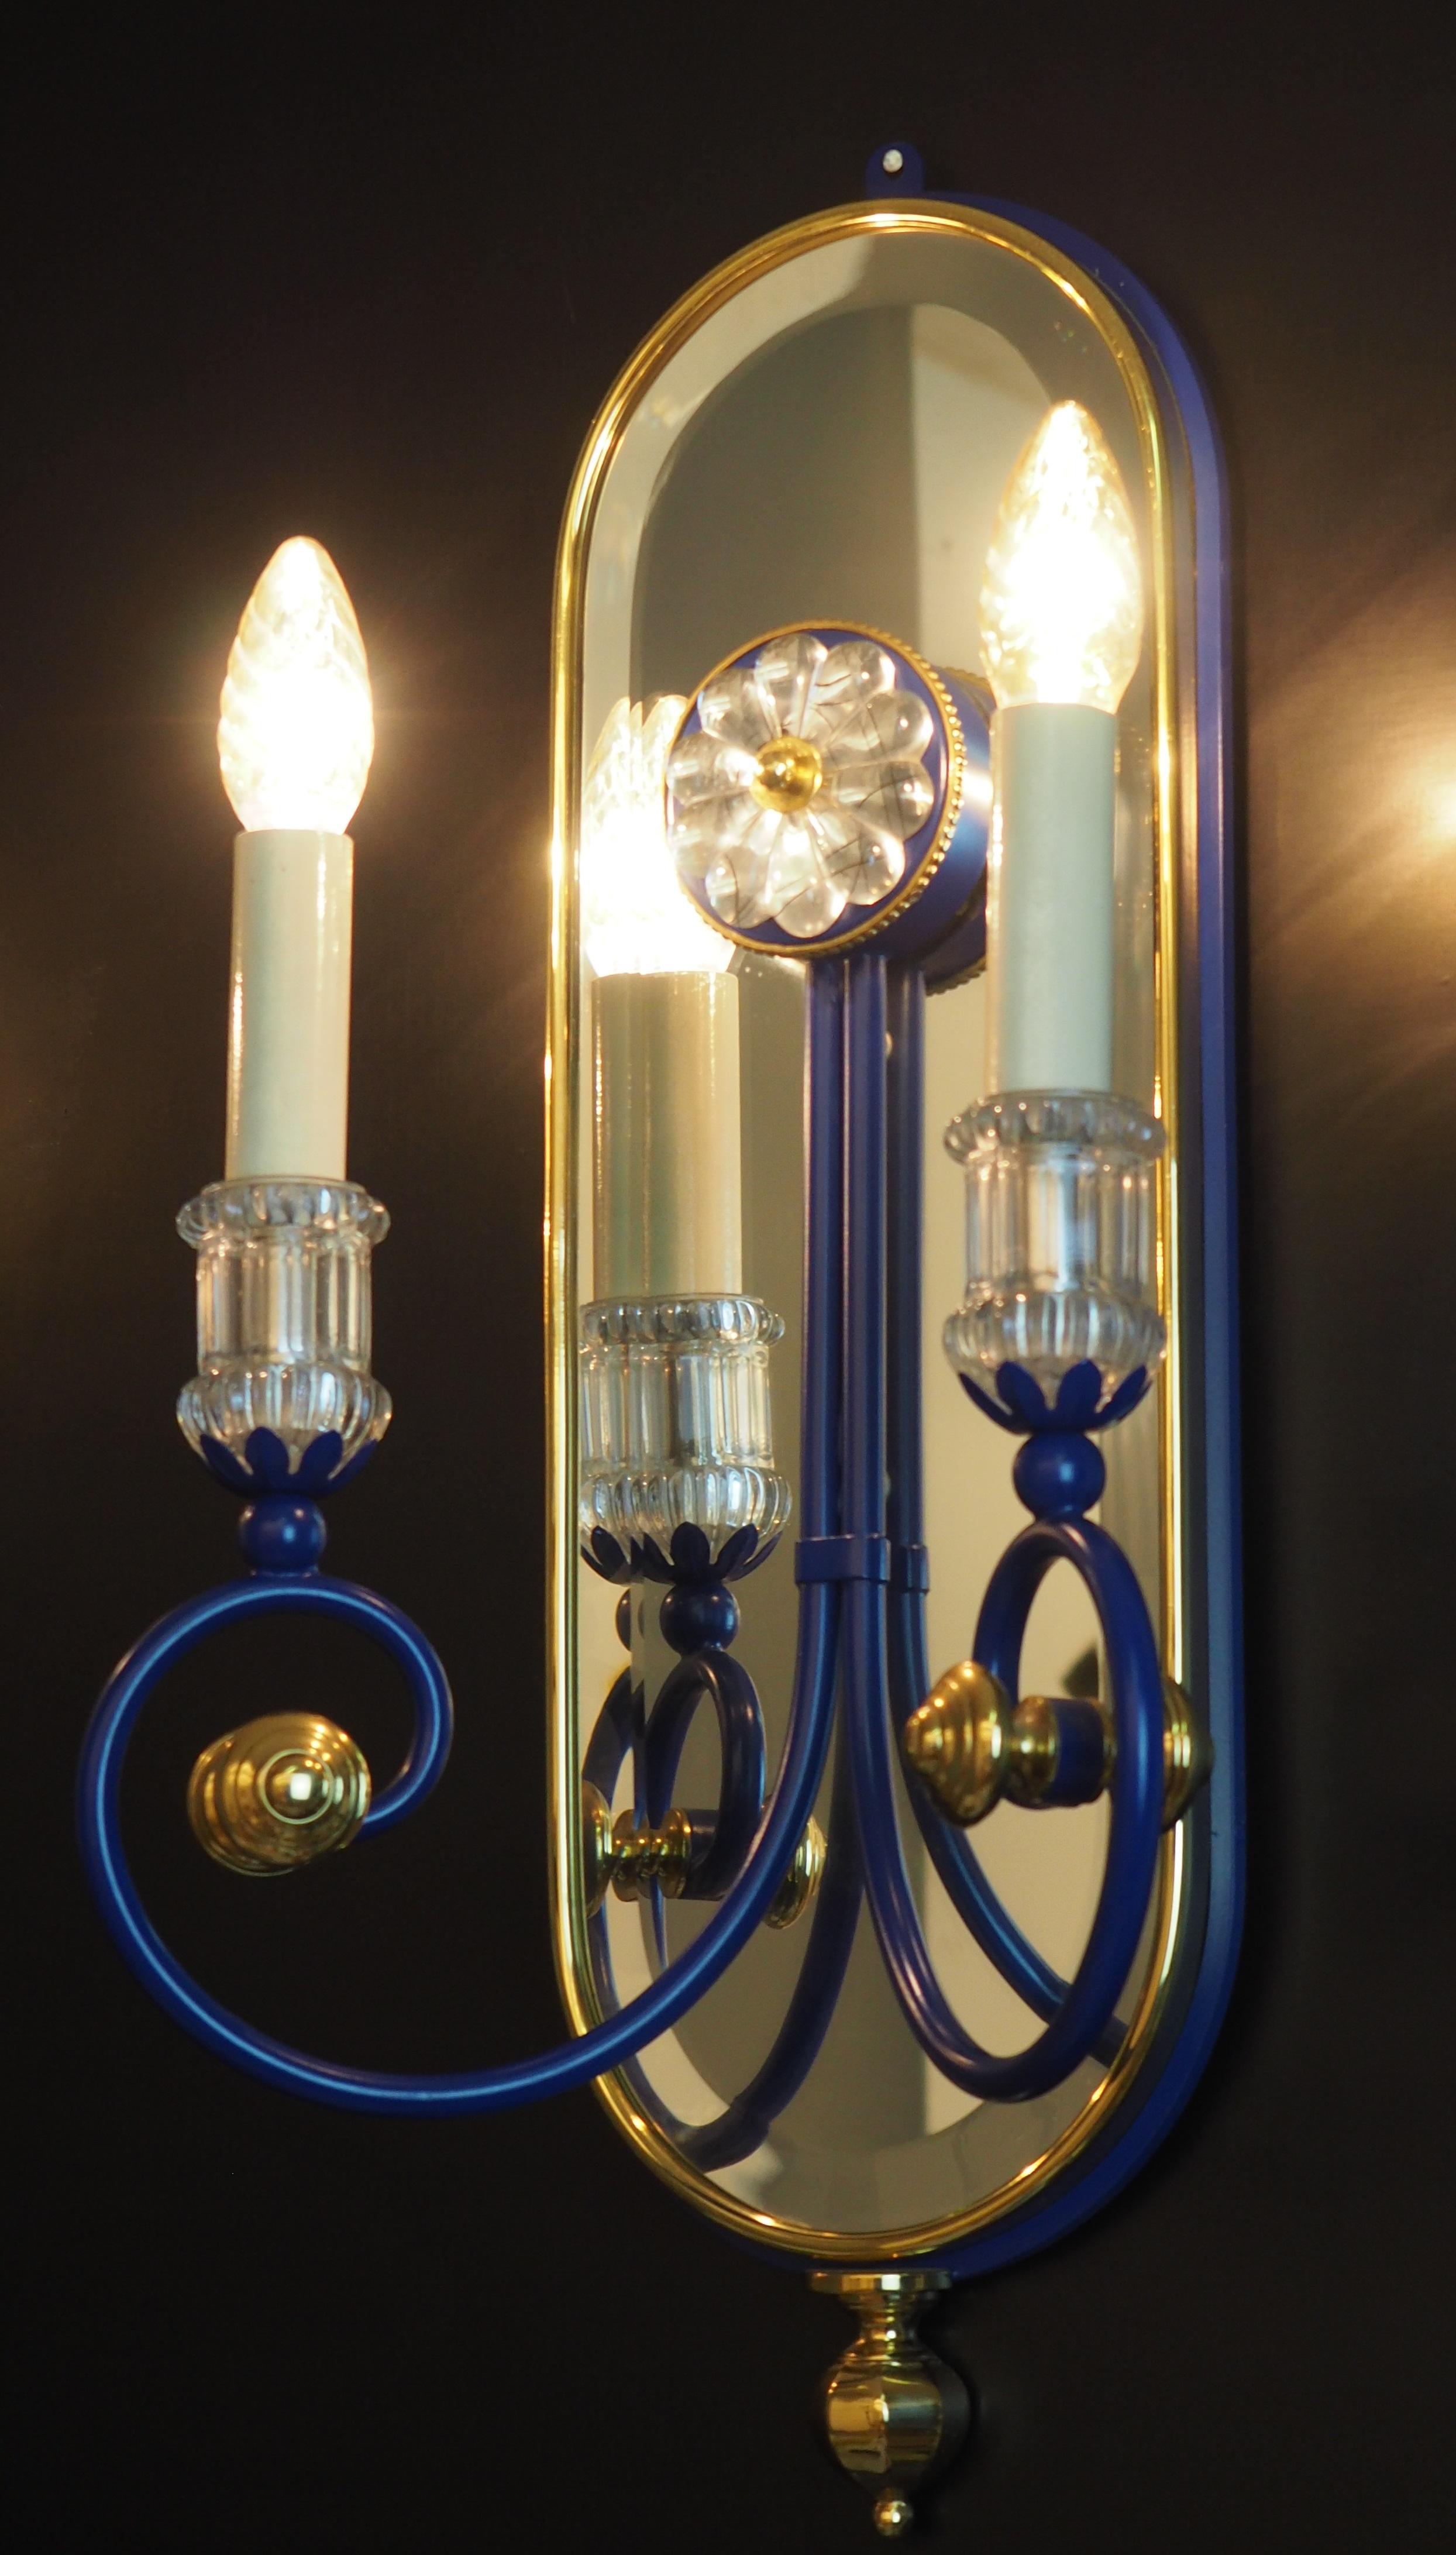 Pair of large mirrored wall lights by Banci, Italy, 1980s.
The fixtures are made of patinated metal, gilt brass and crystal.
Socket: each 2 x e14 for standard screw bulbs.
The condition is excellent. (Three pair available).